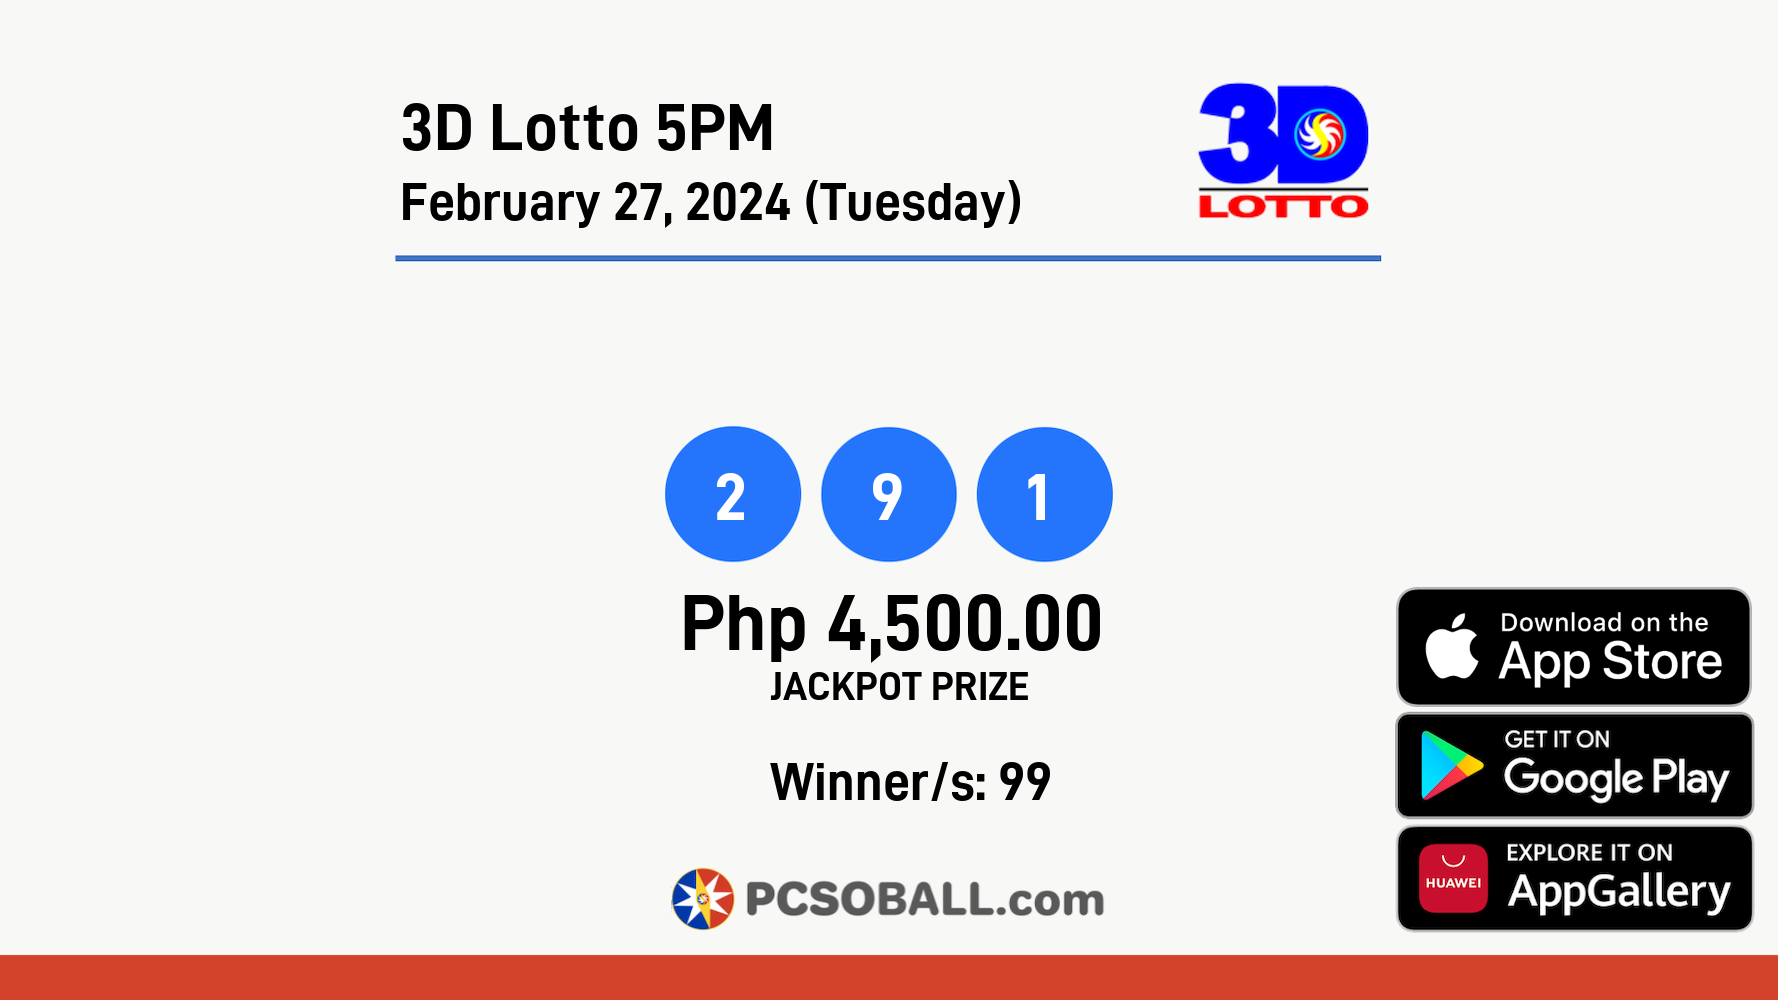 3D Lotto 5PM February 27, 2024 (Tuesday) Result